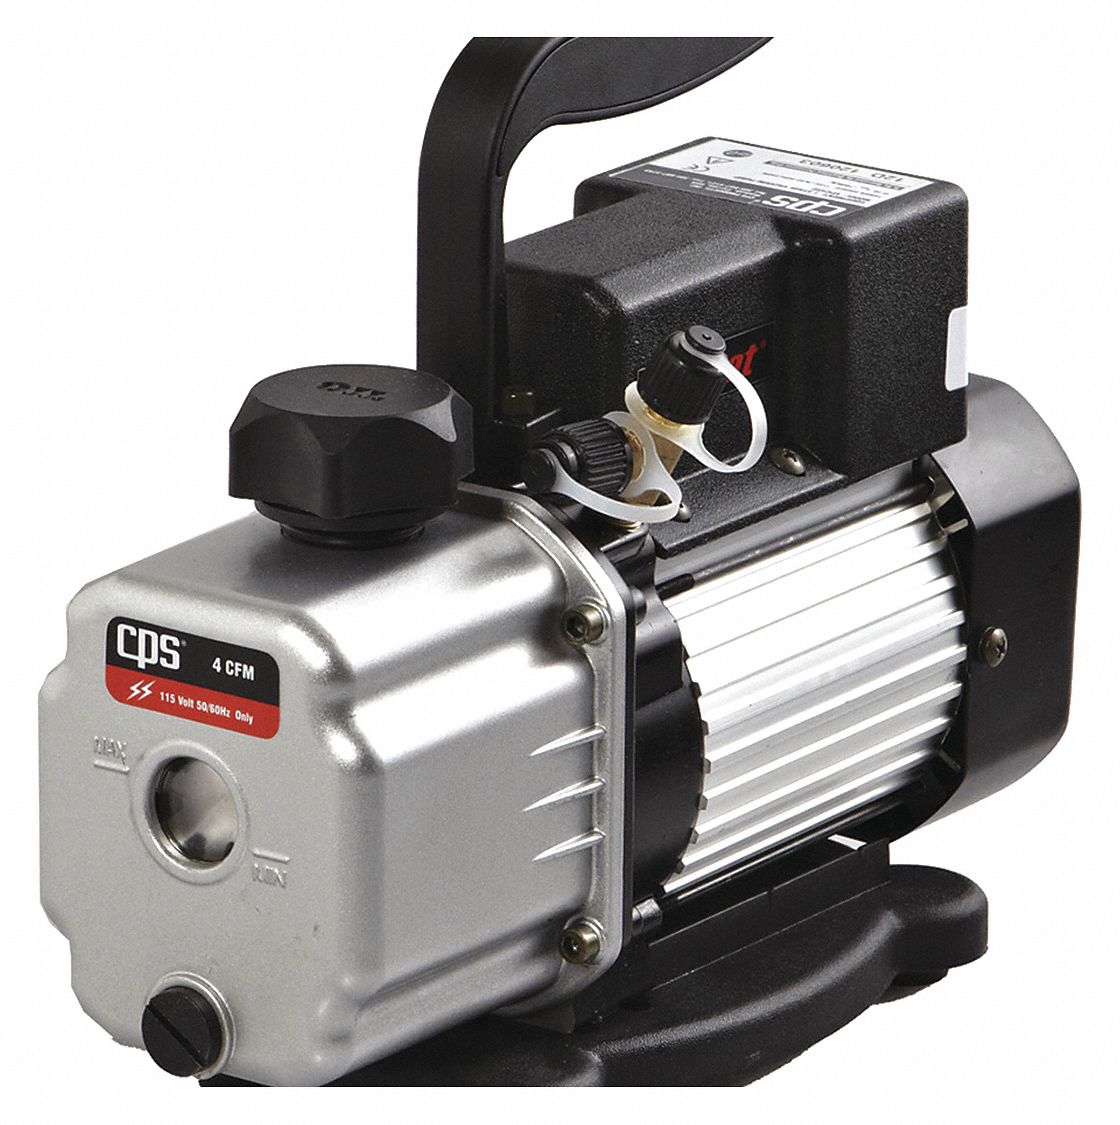 Vacuum Pump: 4 cfm Displacement, 1/4 hp HP, 1/2 in ACME/1/4 in Flare Inlet Port Size